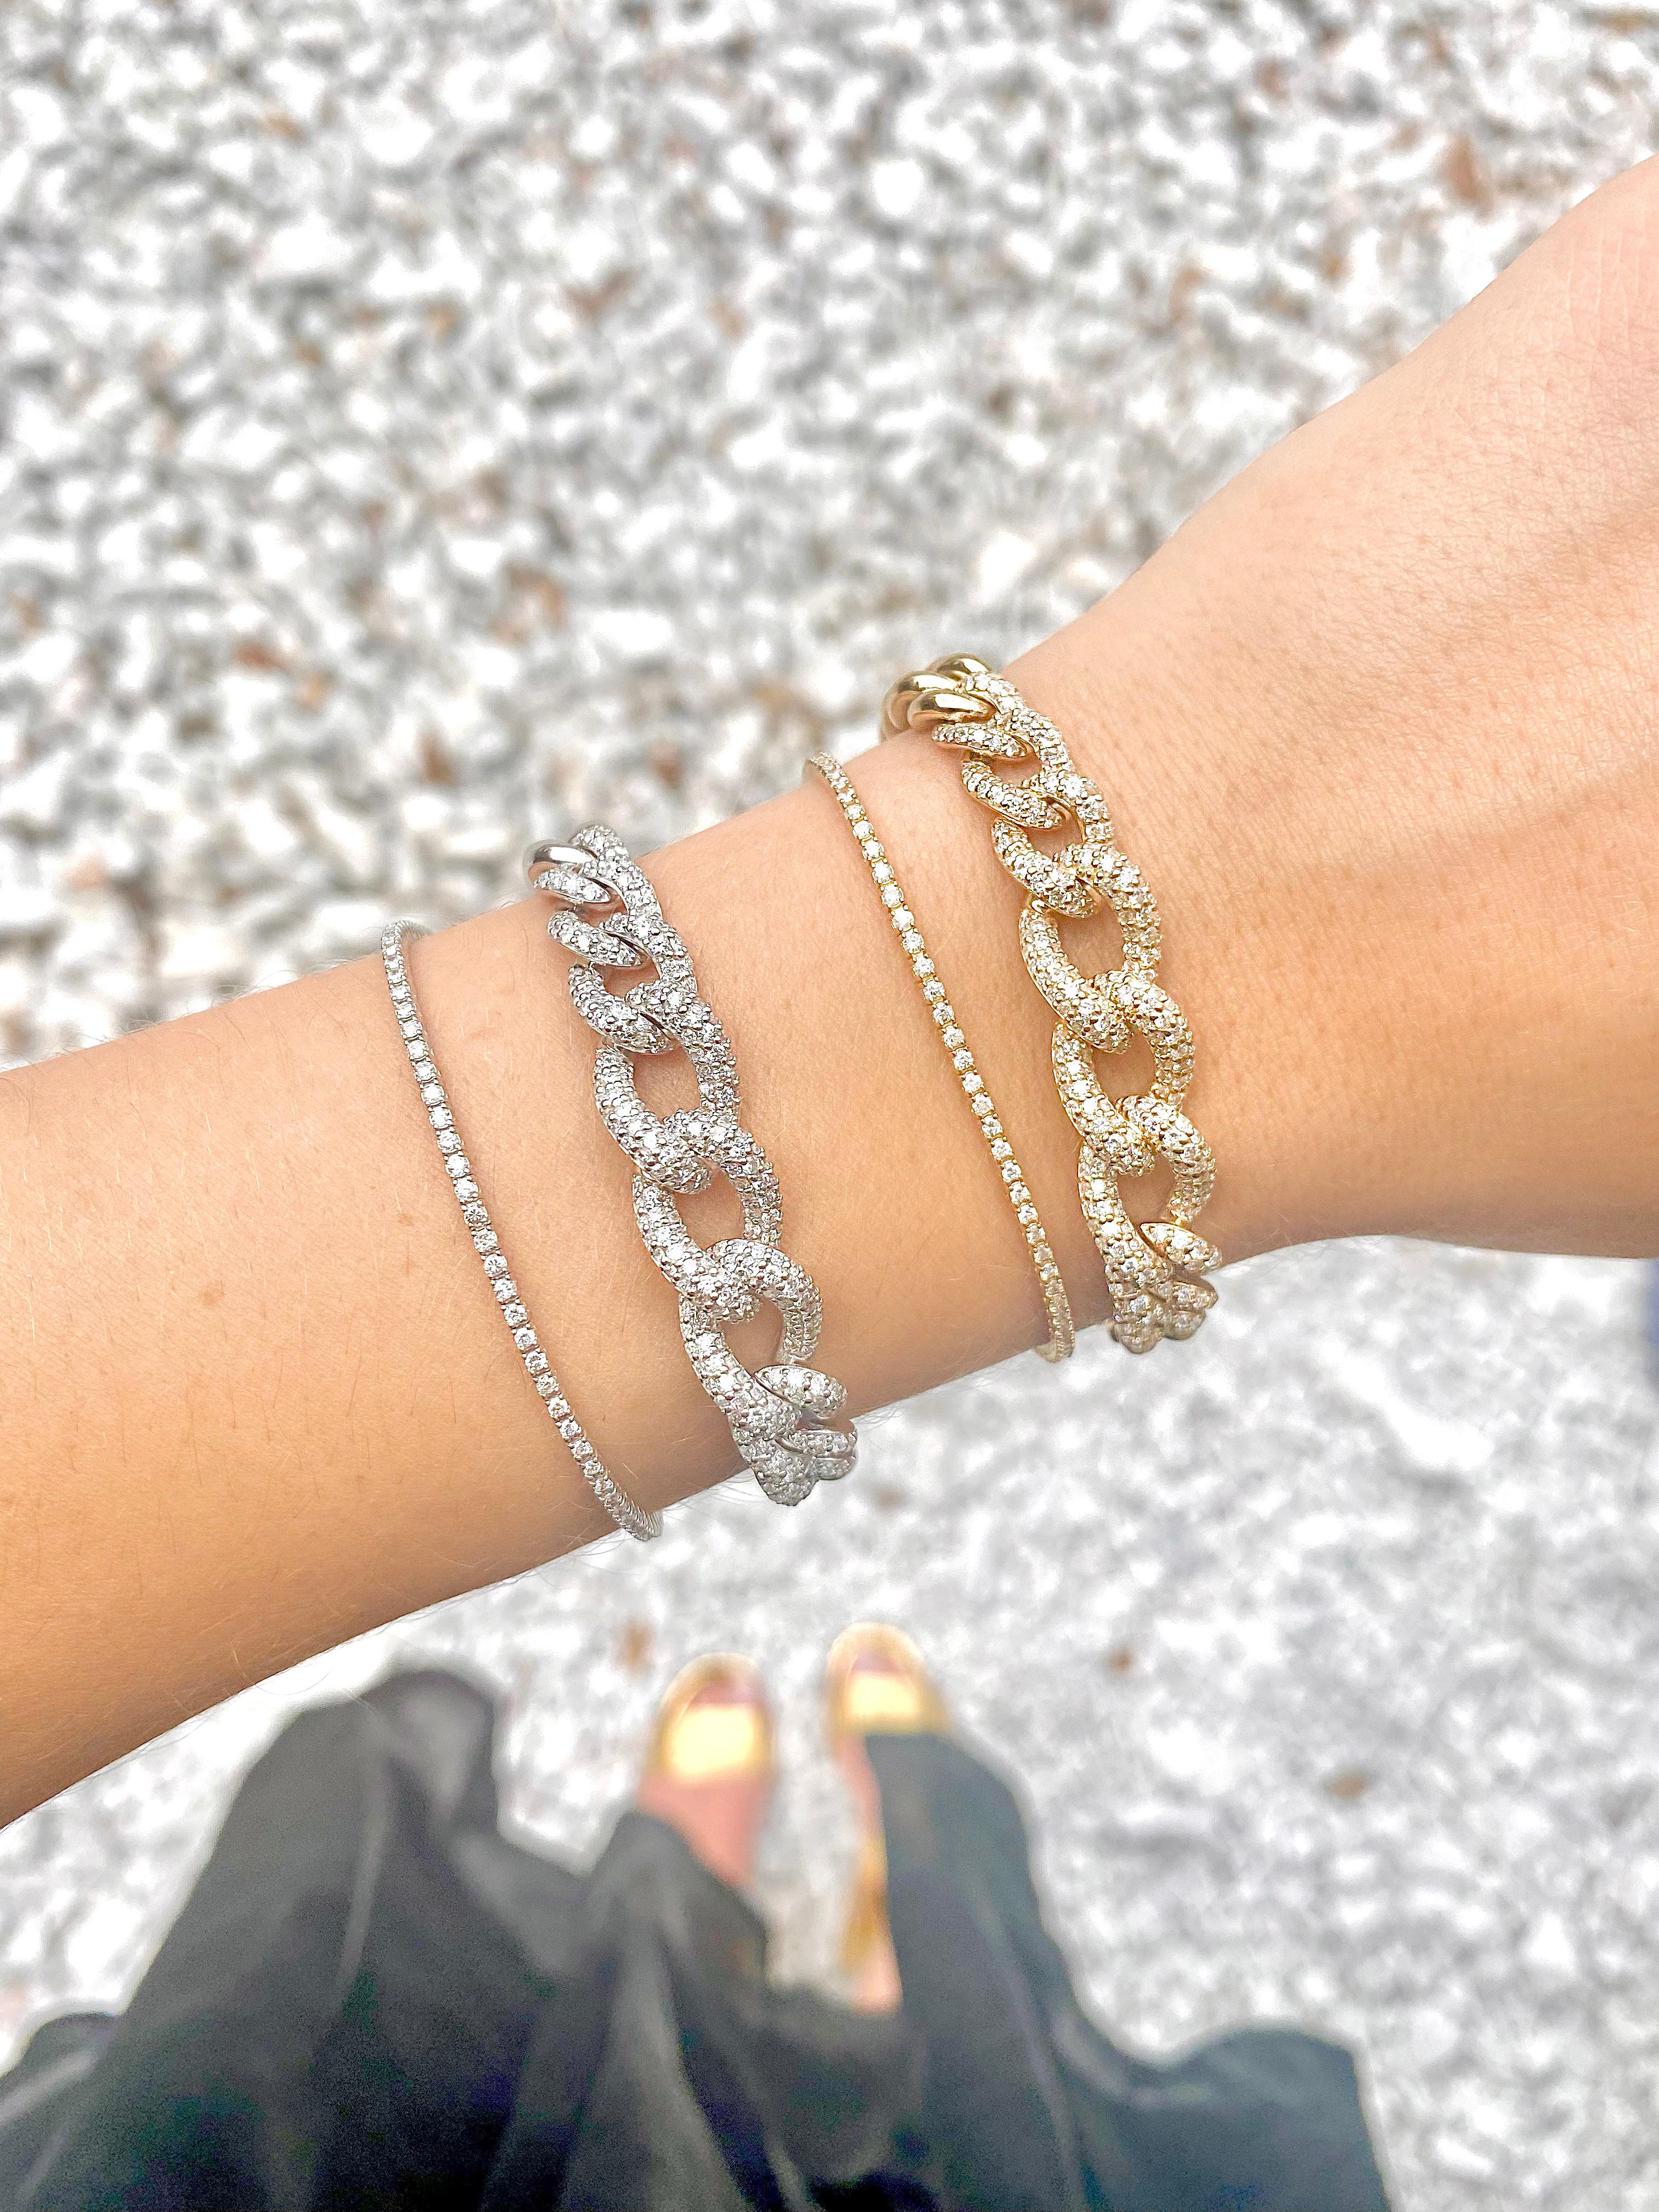 With a string of diamonds, this bracelet is stunning by itself or shared with a bracelet party! With a full carat of diamonds, this bracelet can be ordered in 14 karat white or yellow gold.  Shown in the image in white gold, the diamonds are bright